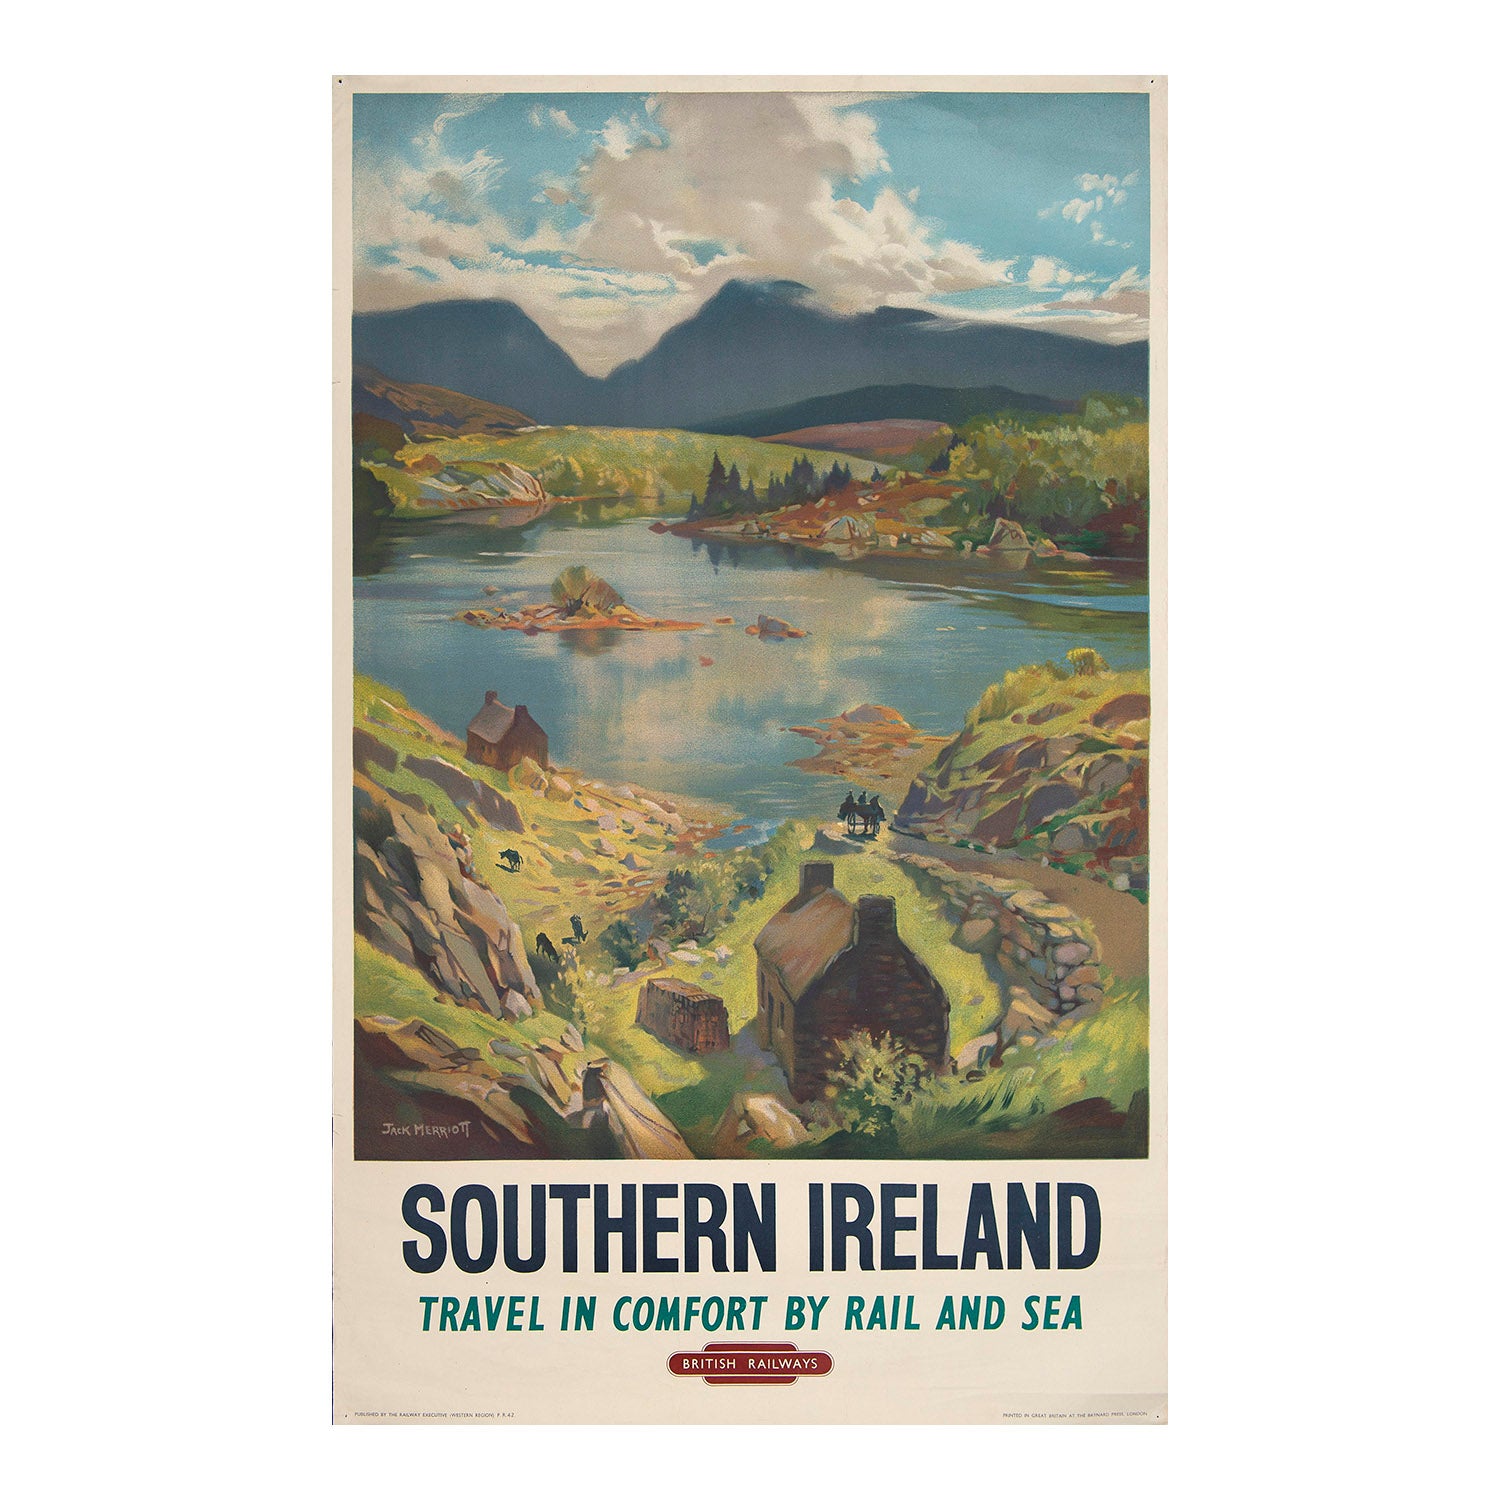 travel poster, Southern Ireland, Travel in Comfort by Rail and Sea, by the British artist Jack Merriott, published by British Railways (Western Region), c.1955. Merriott depicts the mountainous landscape of southern Ireland, with a cottage in the foreground and a winding road leading to a tranquil lake.